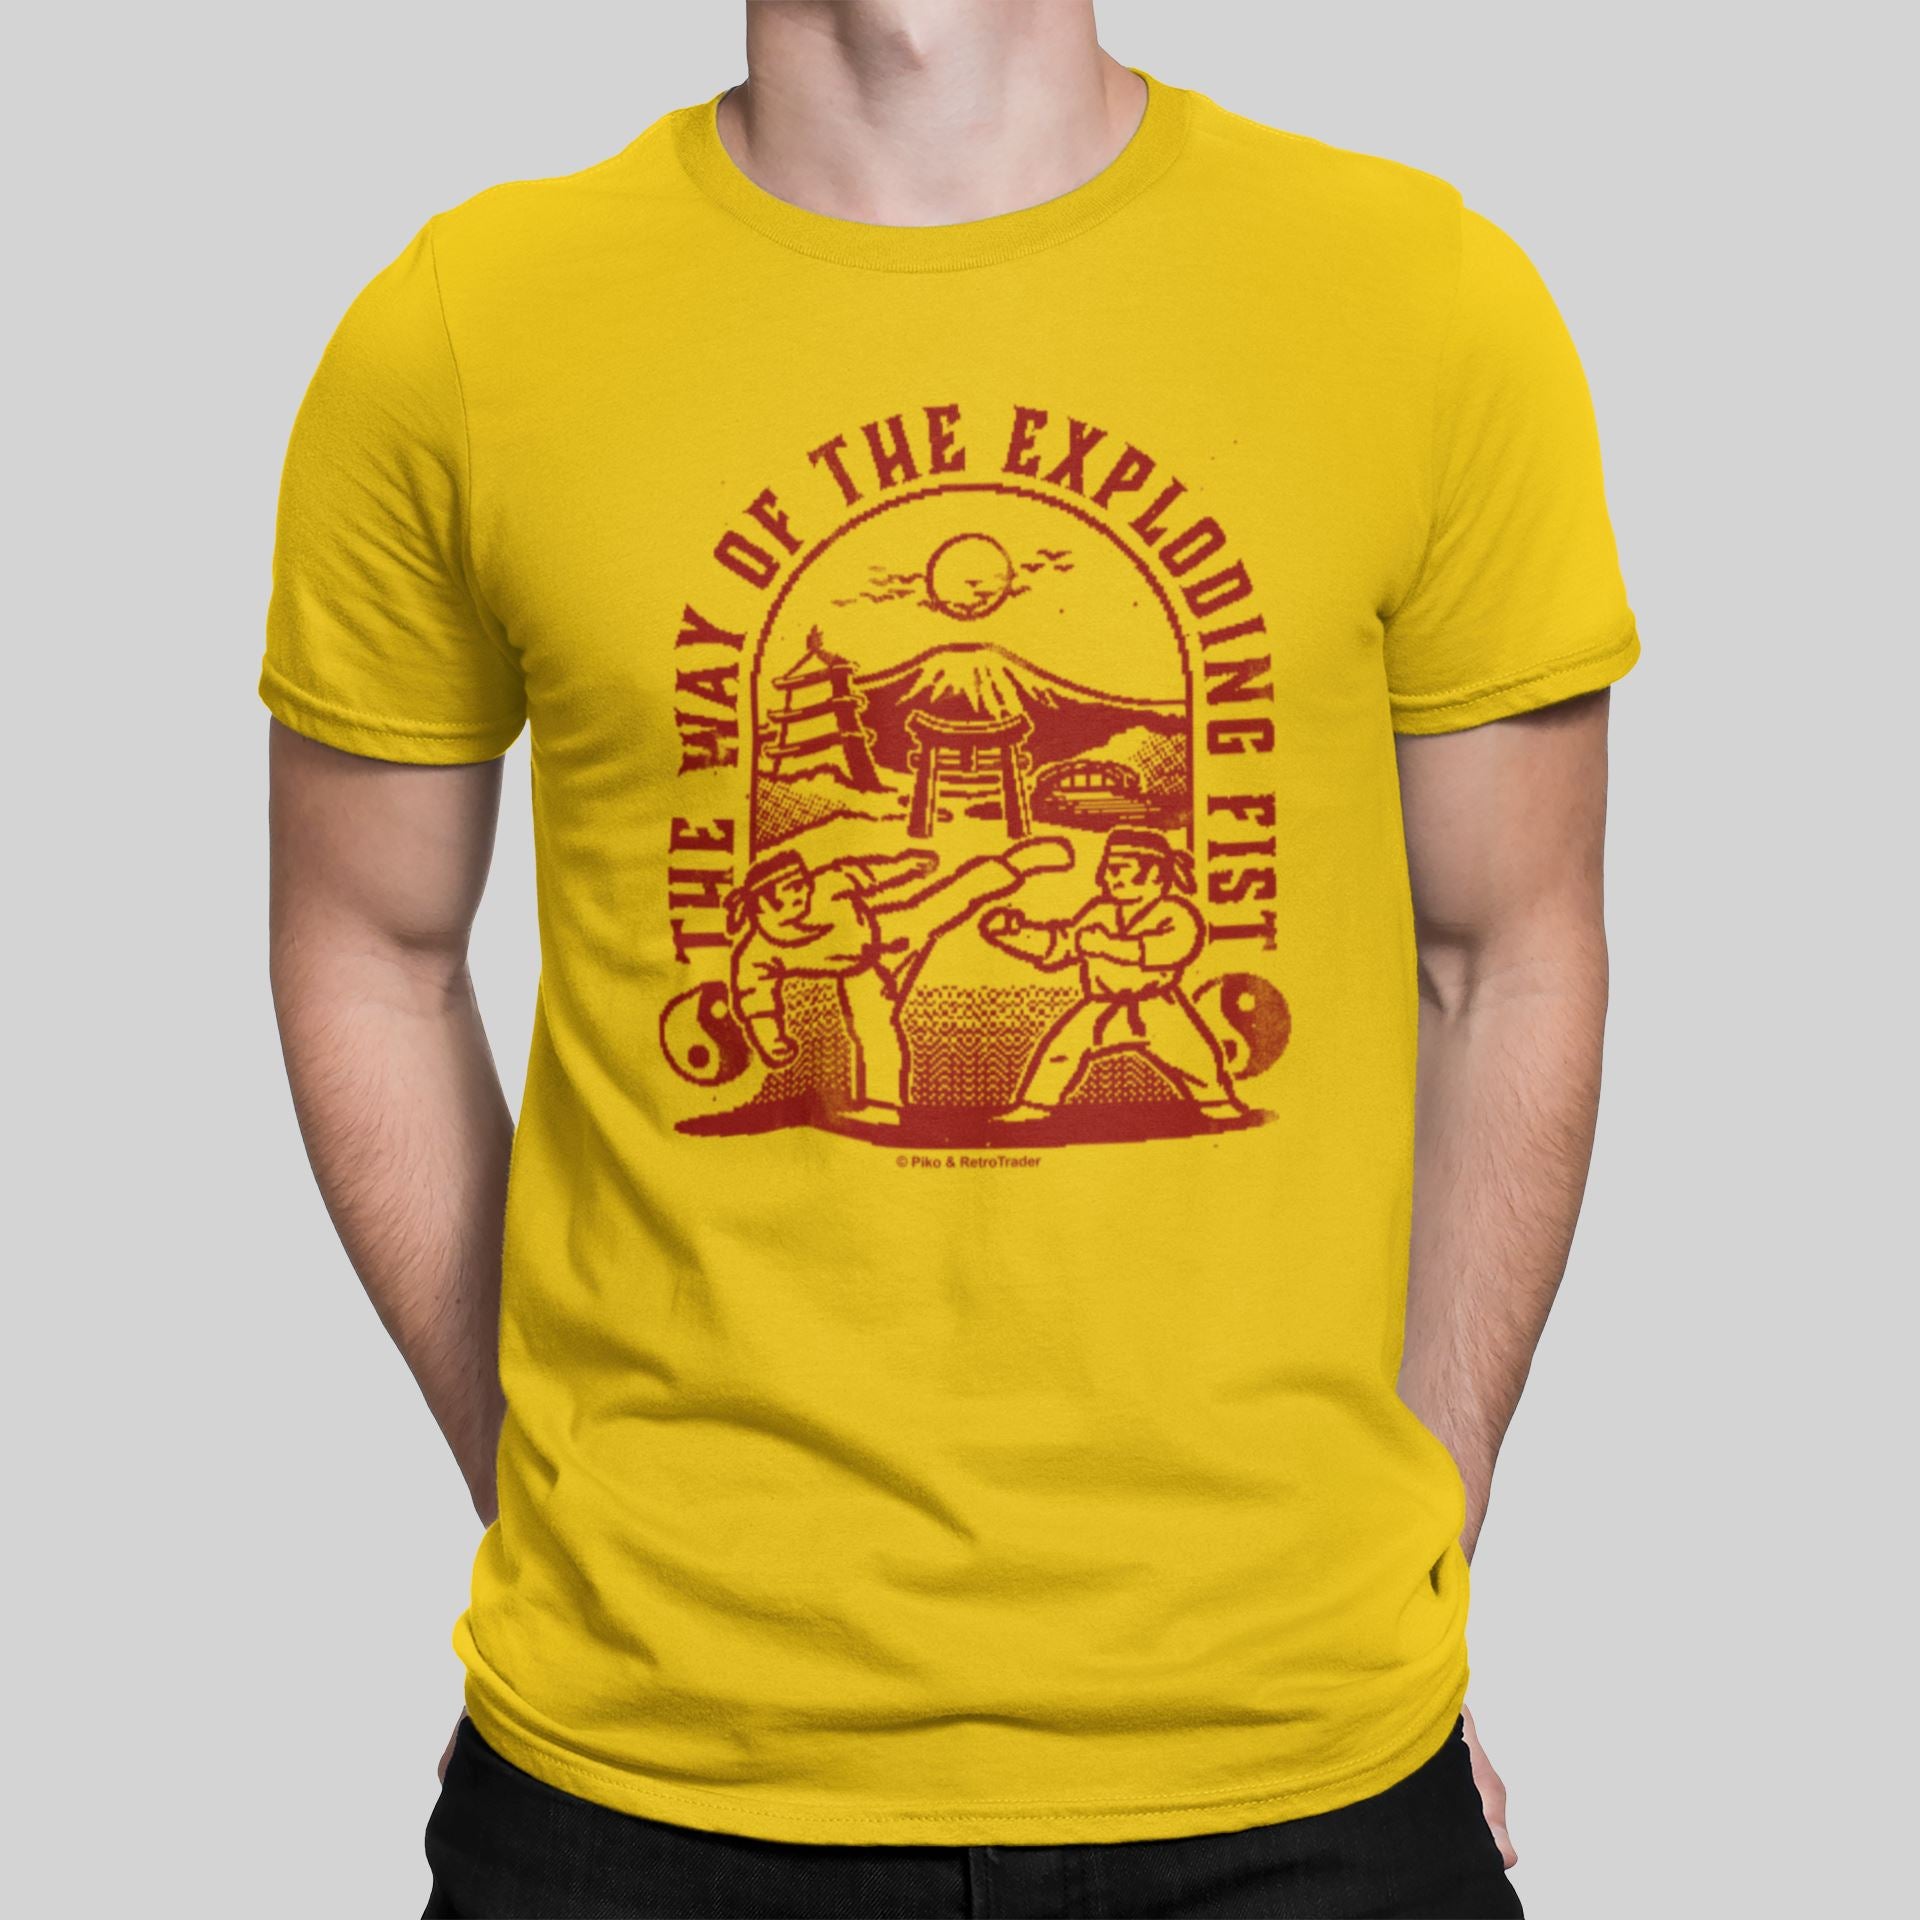 Way Of The Exploding Fist Sunbeam Retro Gaming T-Shirt T-Shirt Seven Squared Small 34-36" Yellow 